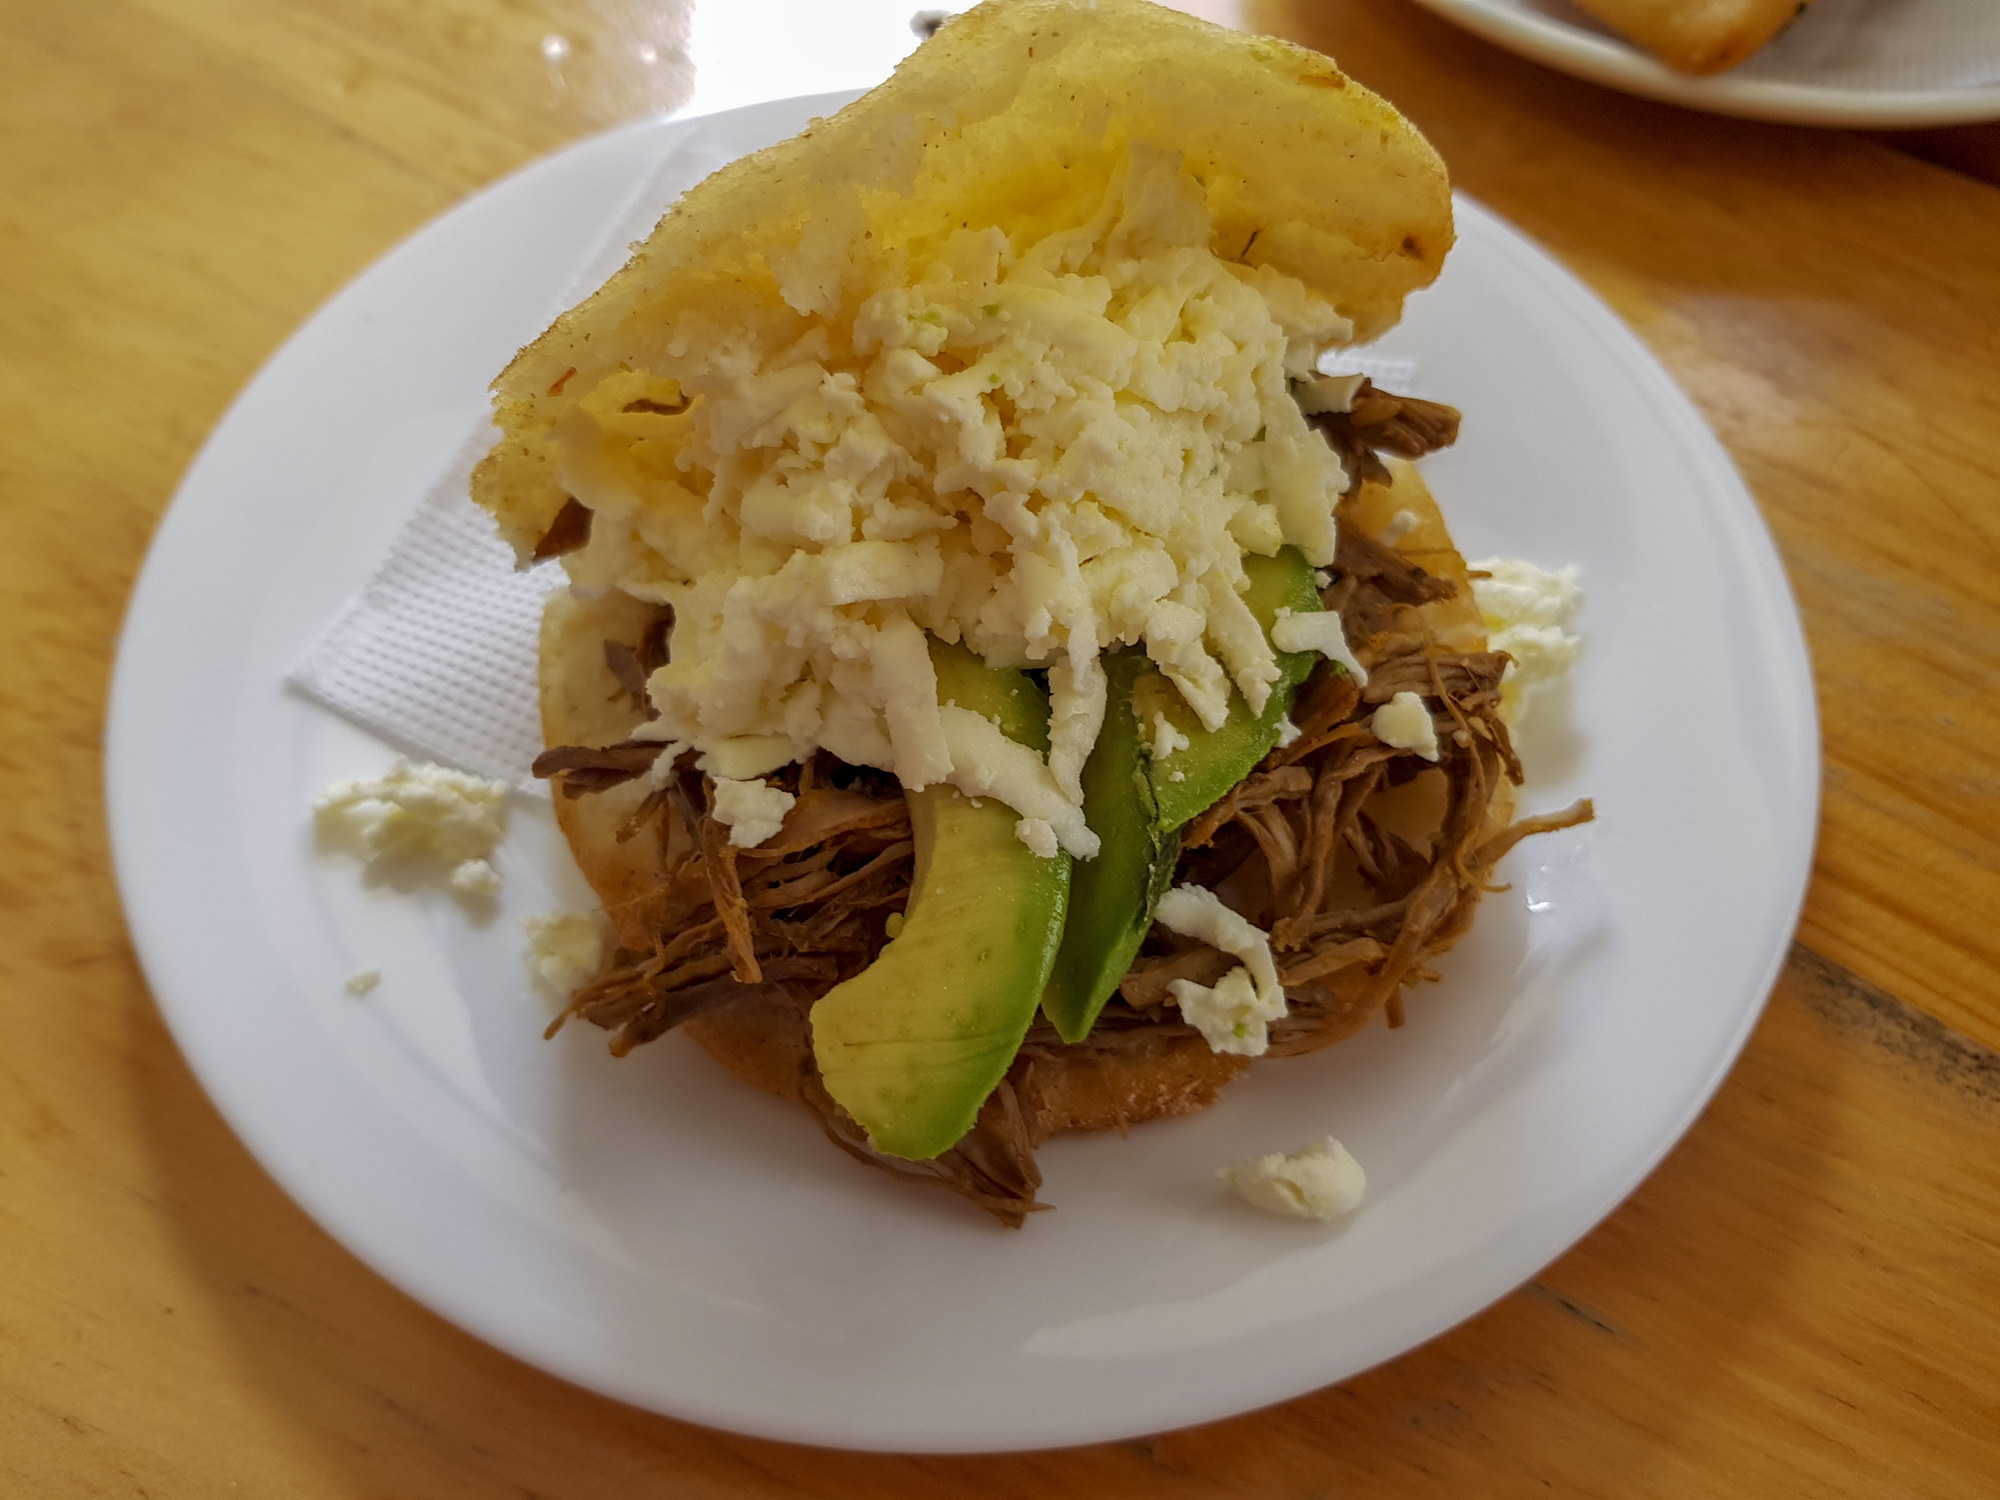 An arepa with meat, avocado, and cheese.